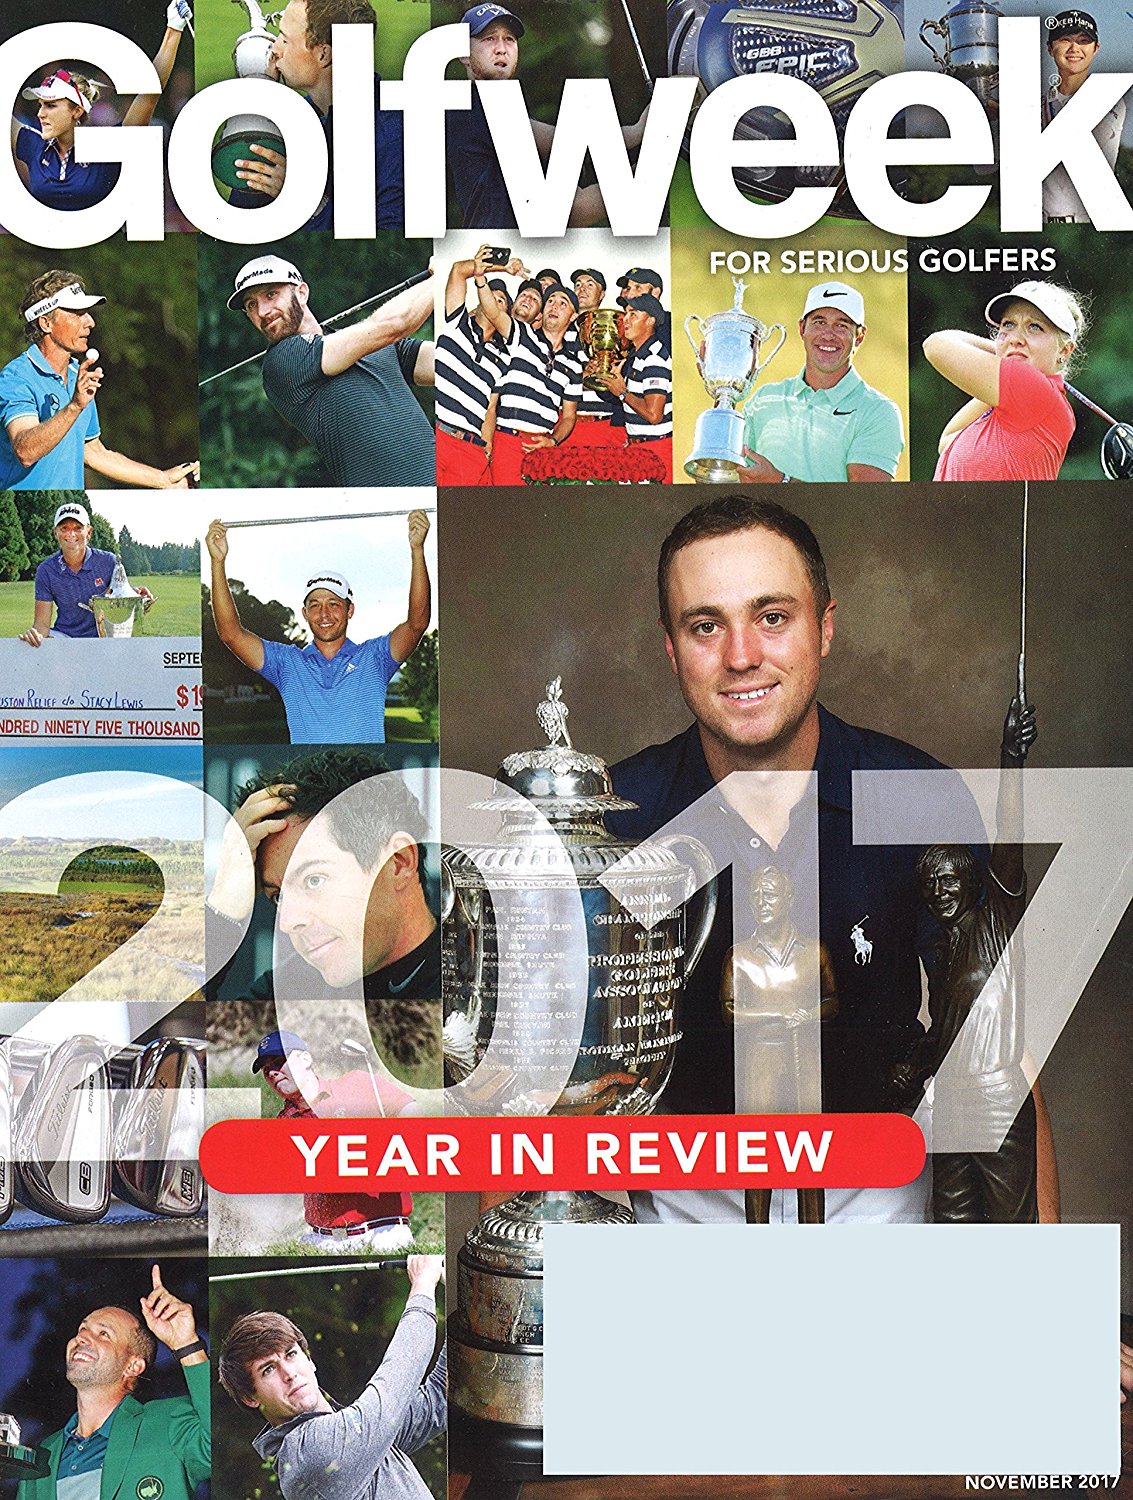 Golfweek Magazine from $29.95! Find the lowest price on 